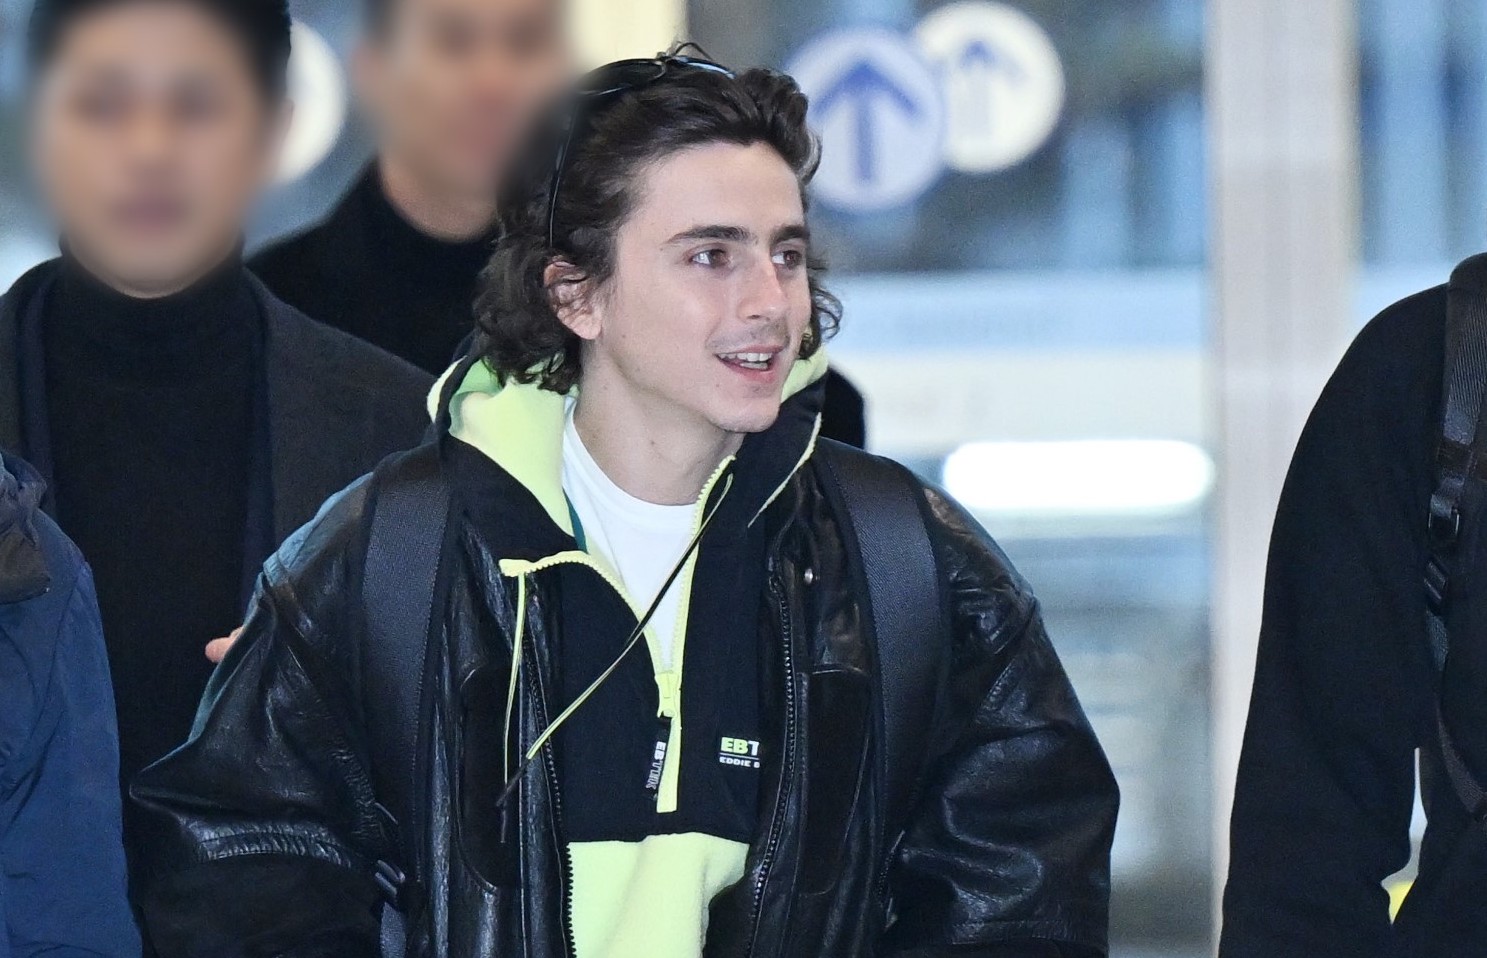 Timothée Chalamet walks through Incheon Airport, dressed in casual yet stylish attire, featuring a pair of Gucci Re-Web sneakers.